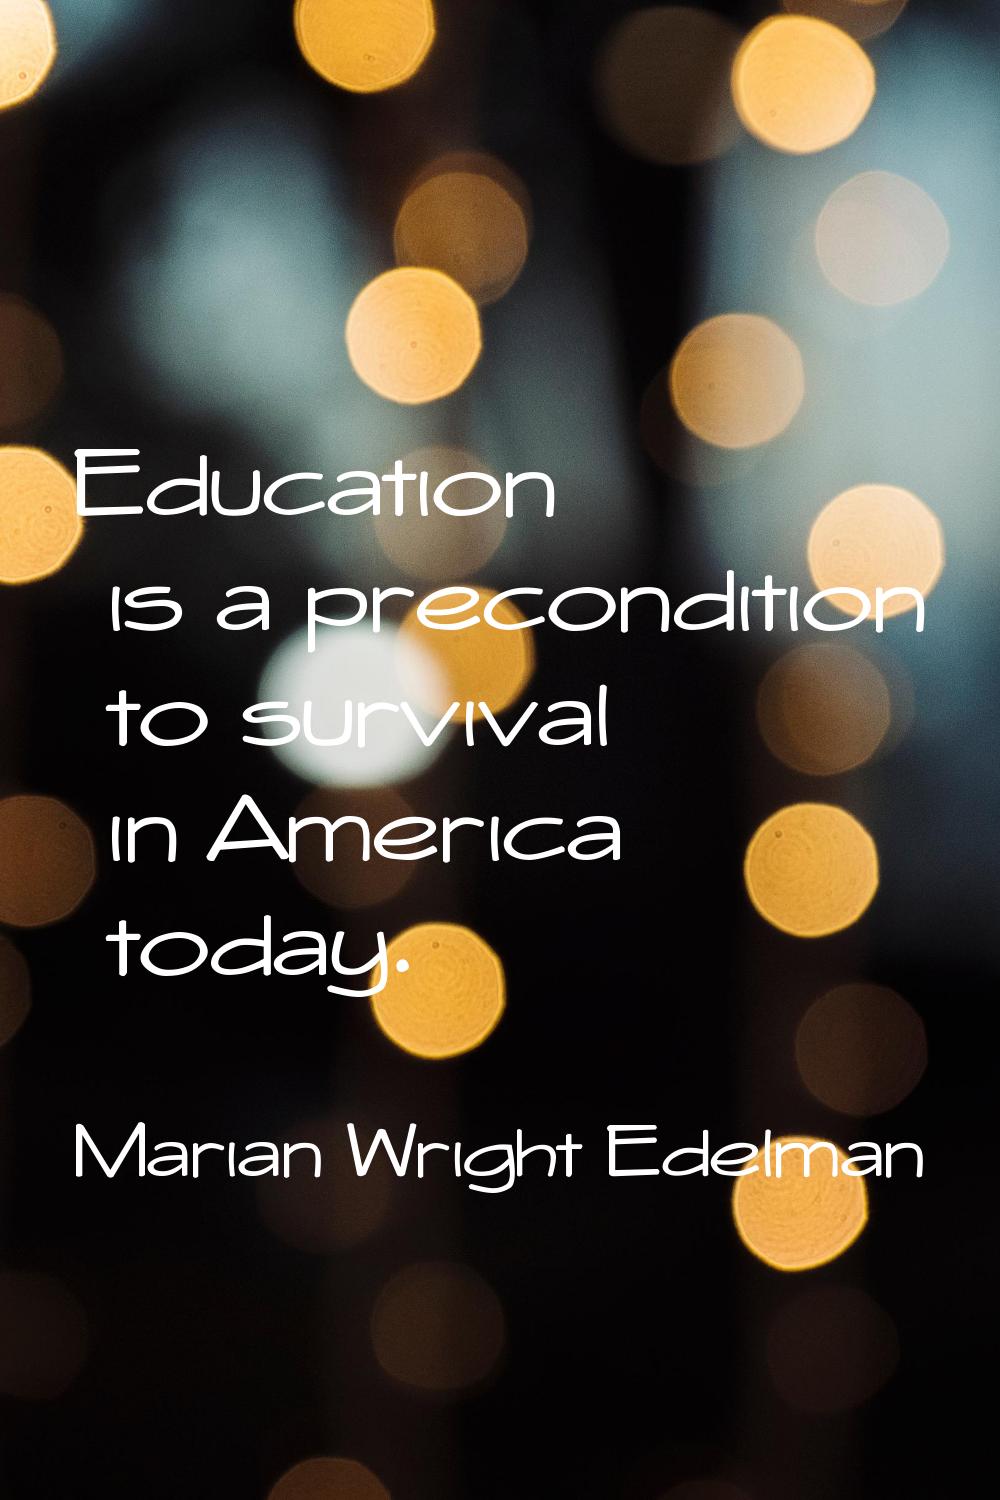 Education is a precondition to survival in America today.